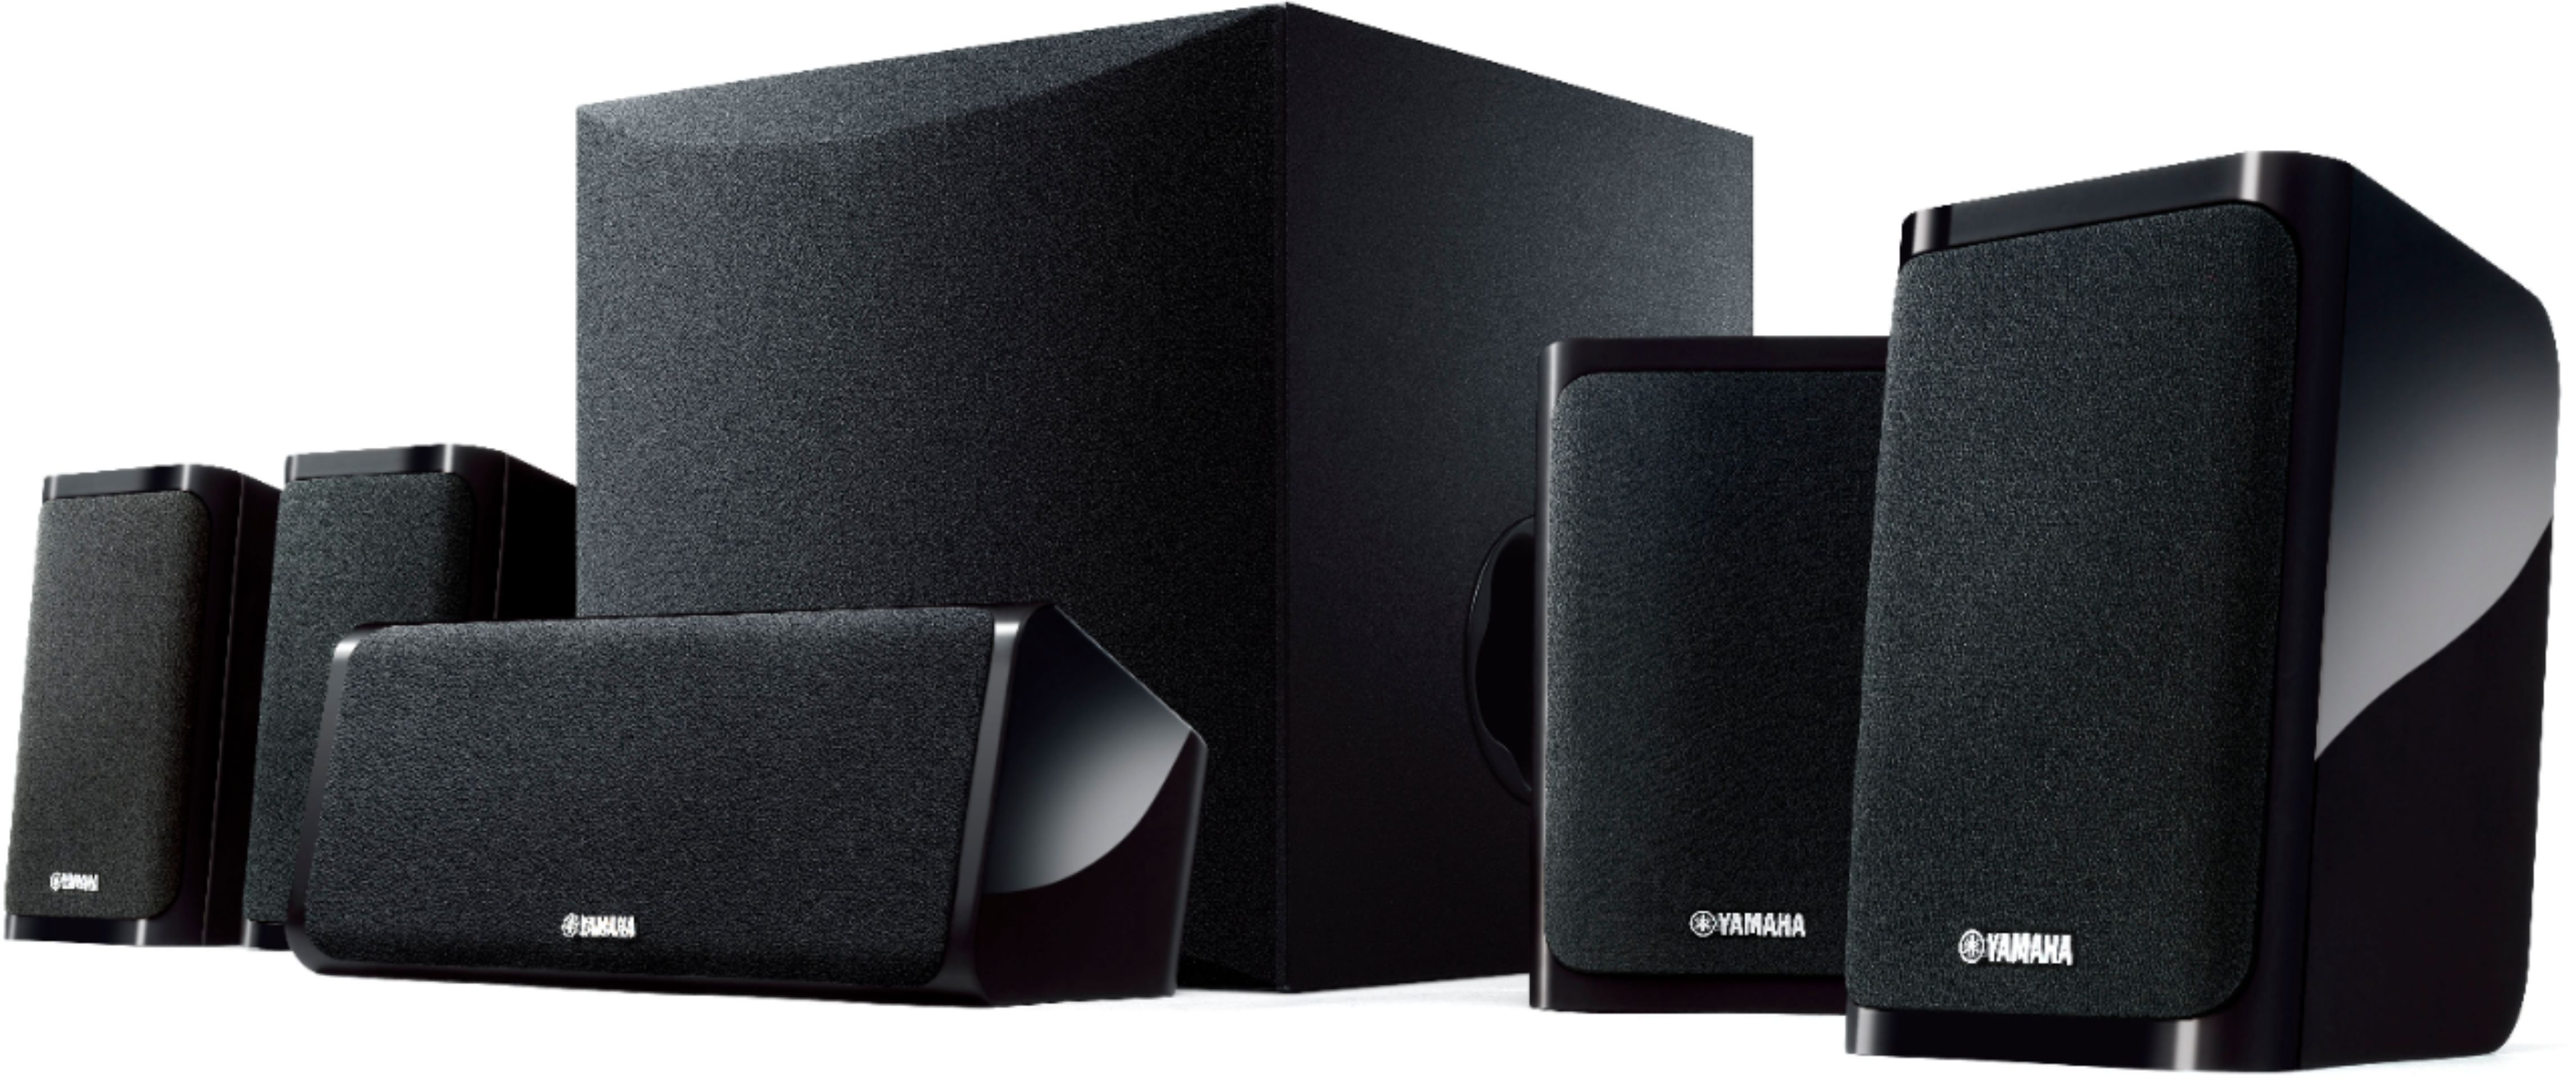 Yamaha 5.1-Channel 4K Home Theater Speaker System with Powered